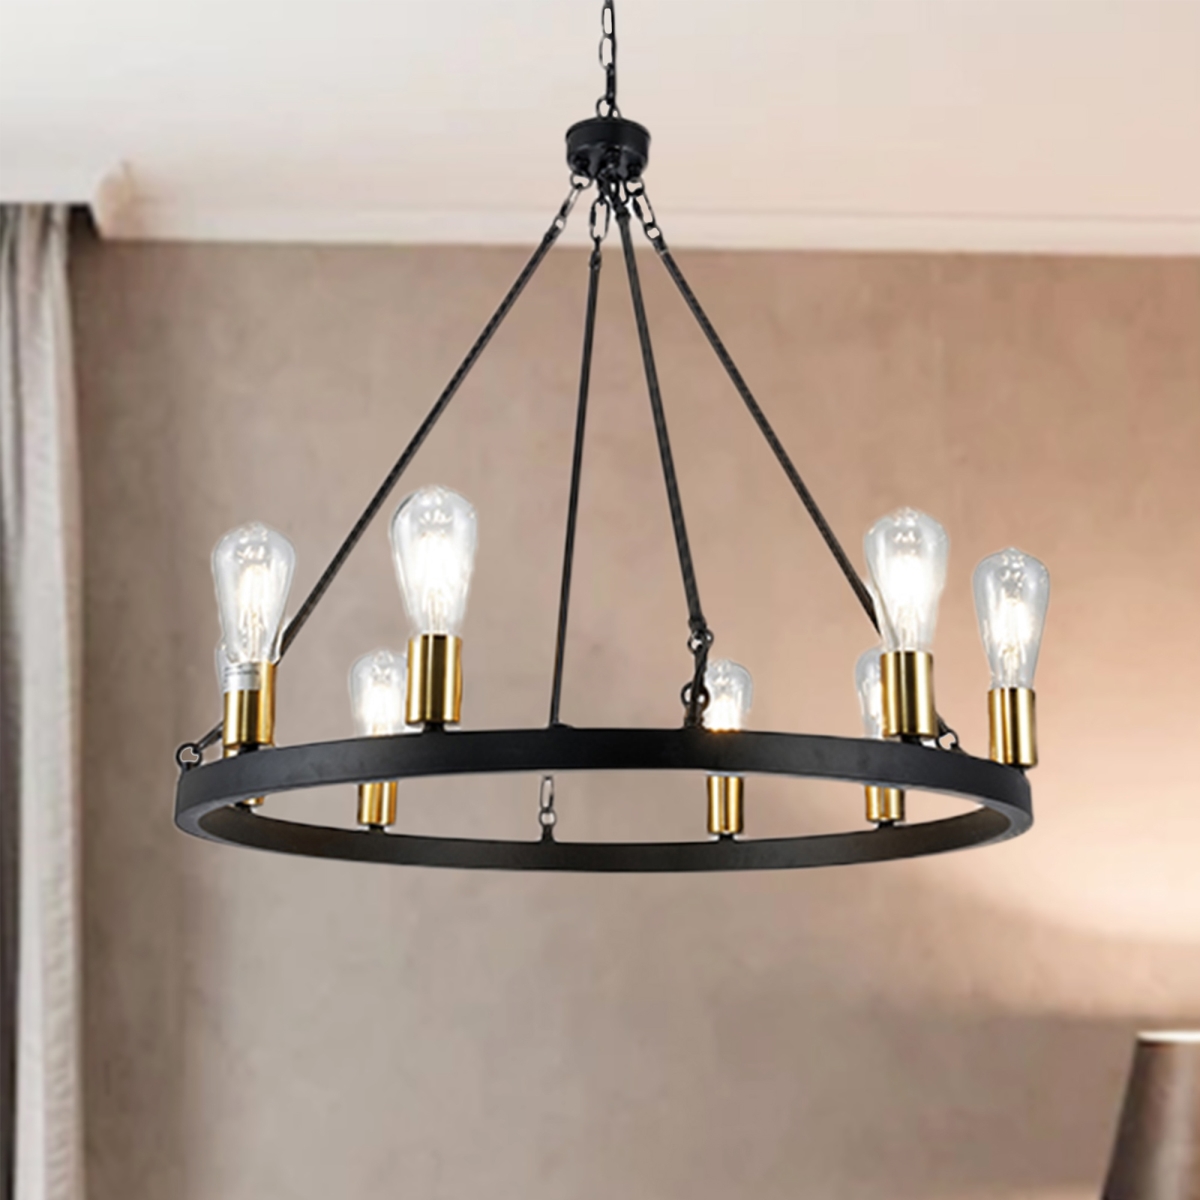 Daryu 27.6 in. 8-Light Indoor Black Finish Chandelier with Light Kit